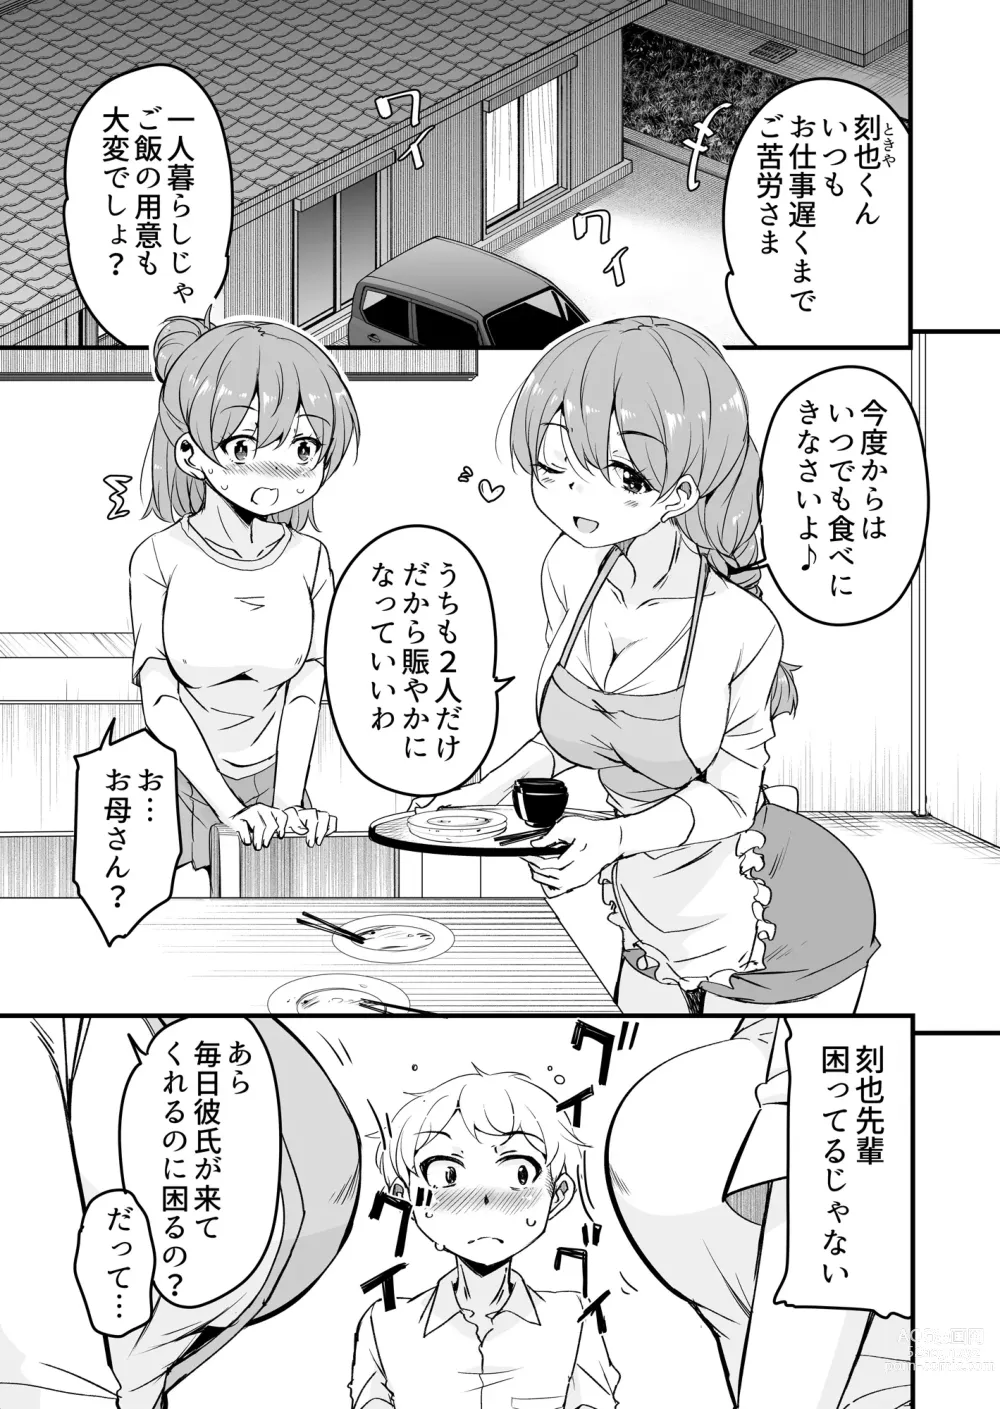 Page 4 of doujinshi 人妻店長2〜娘の彼氏お借りします〜